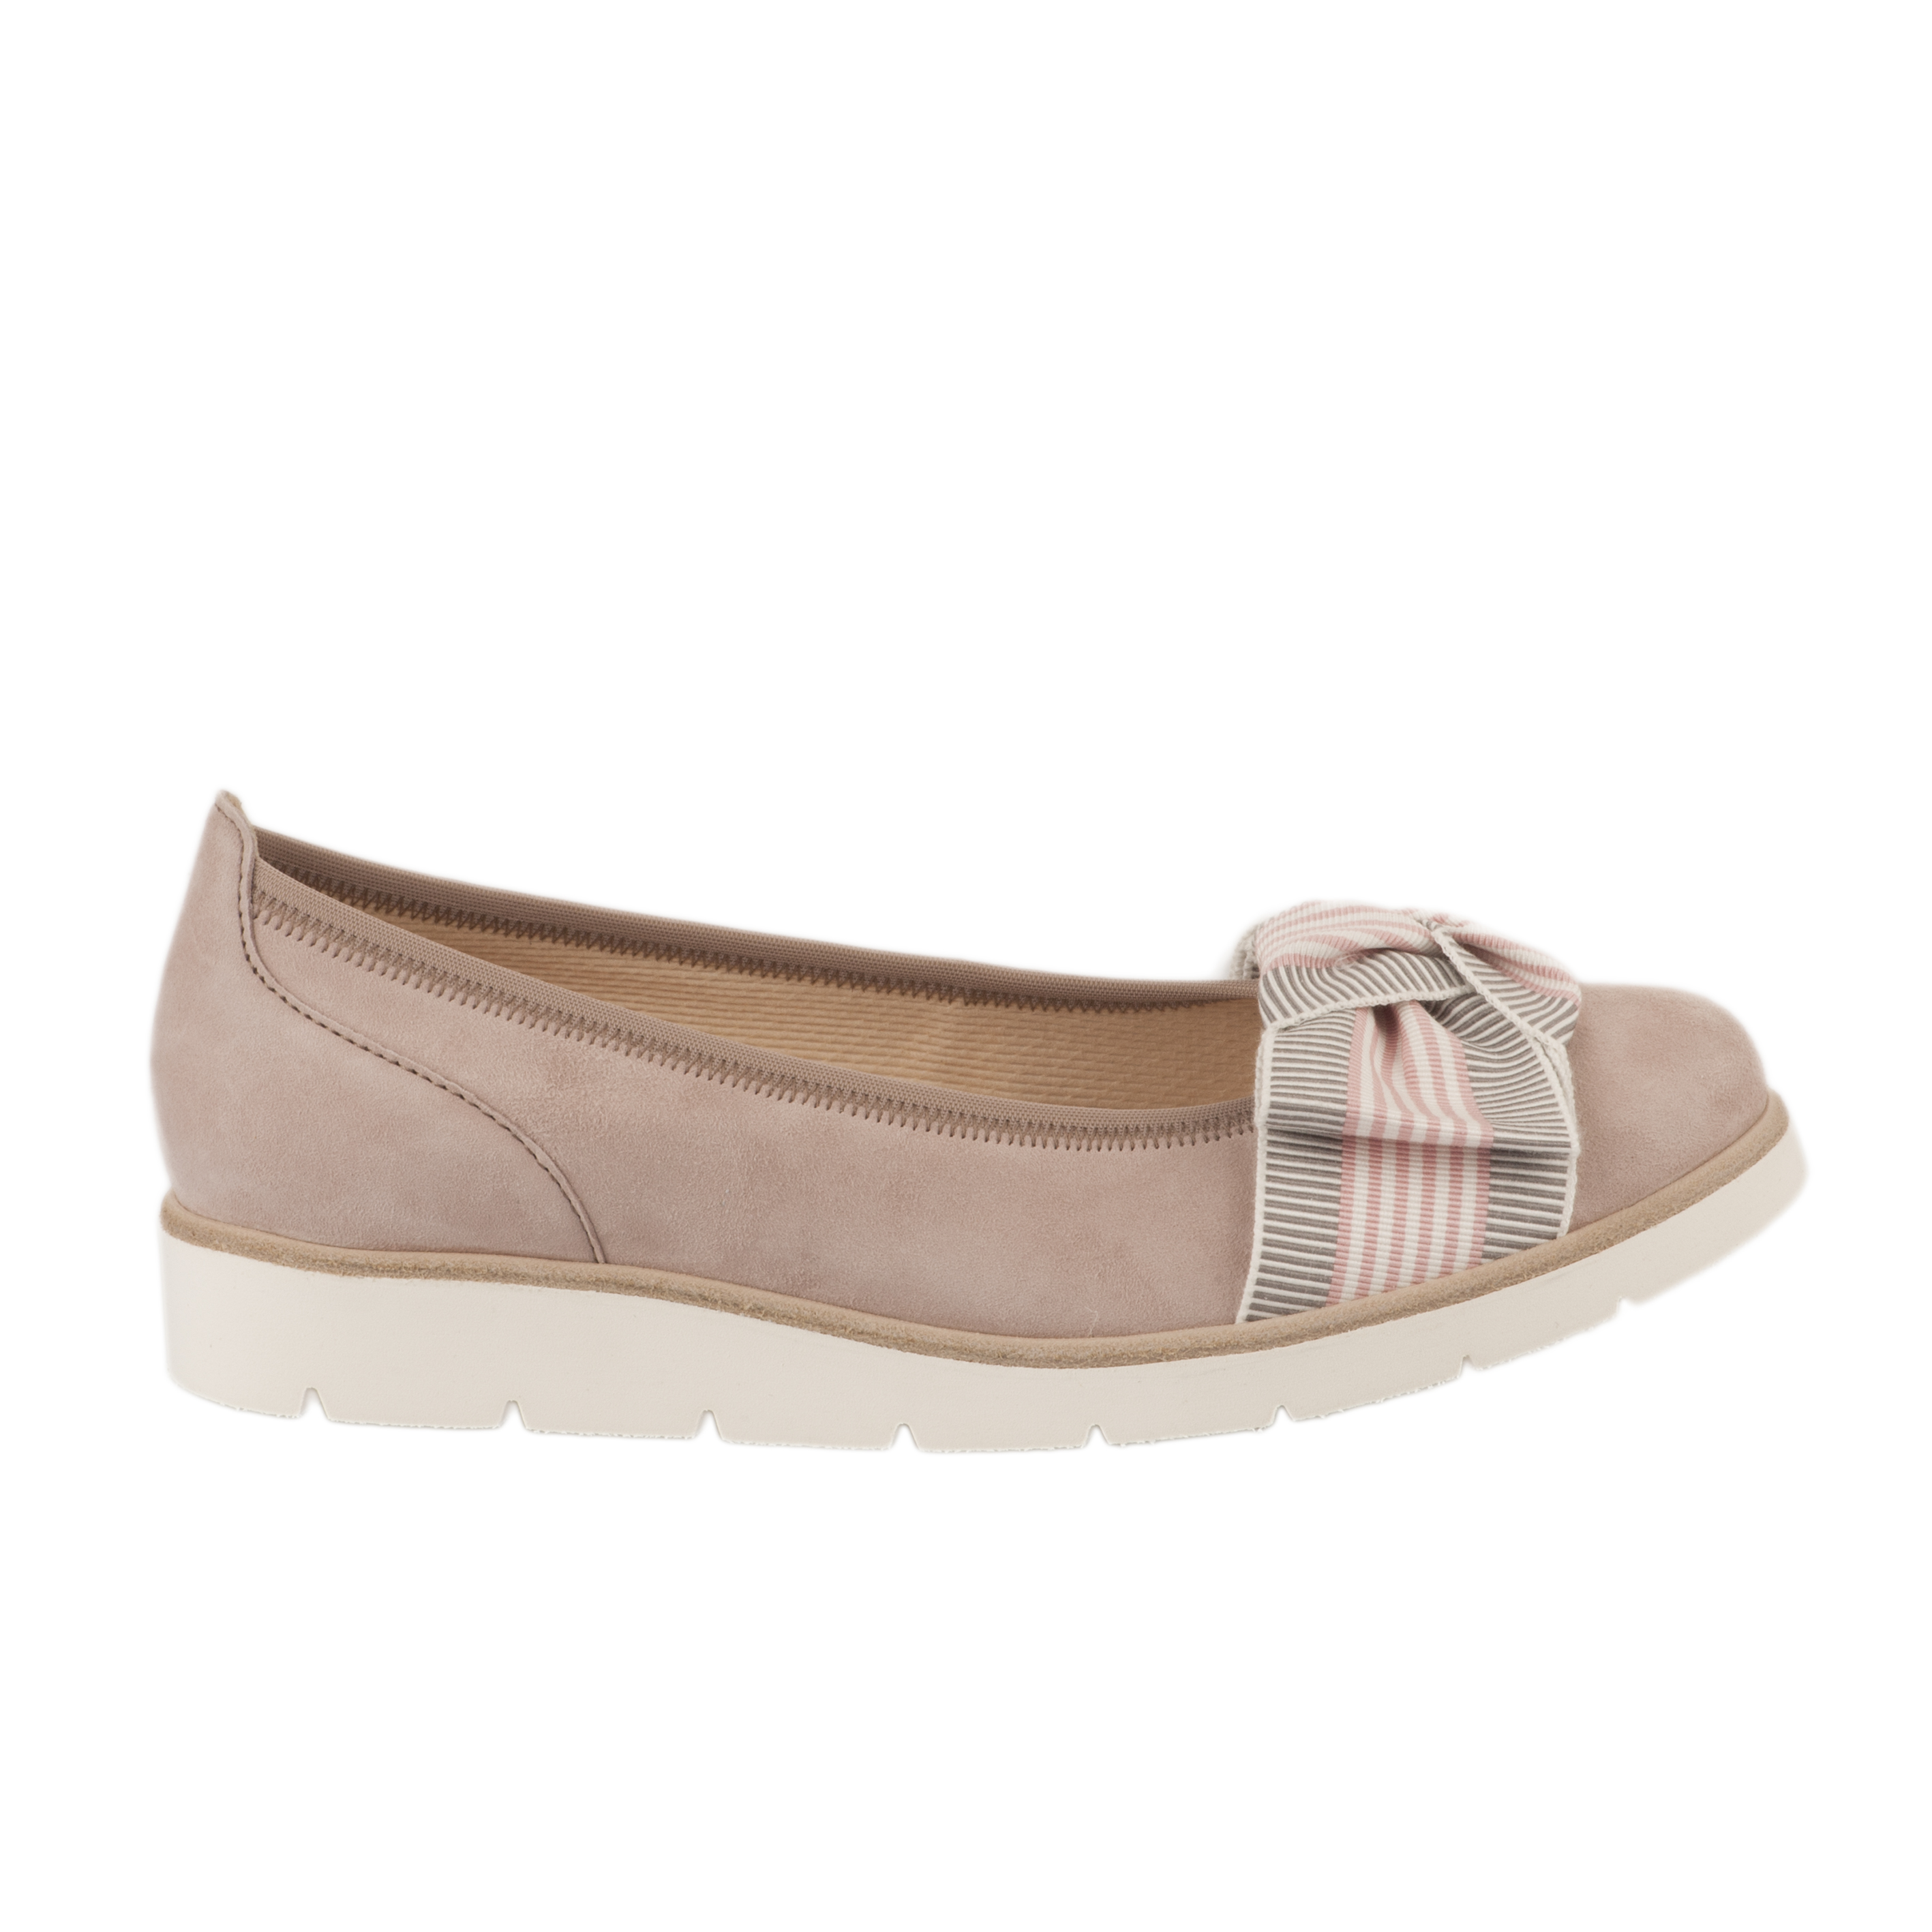 Gabor Ballerines classiques rose chair style d\u00e9contract\u00e9 Chaussures Ballerines 